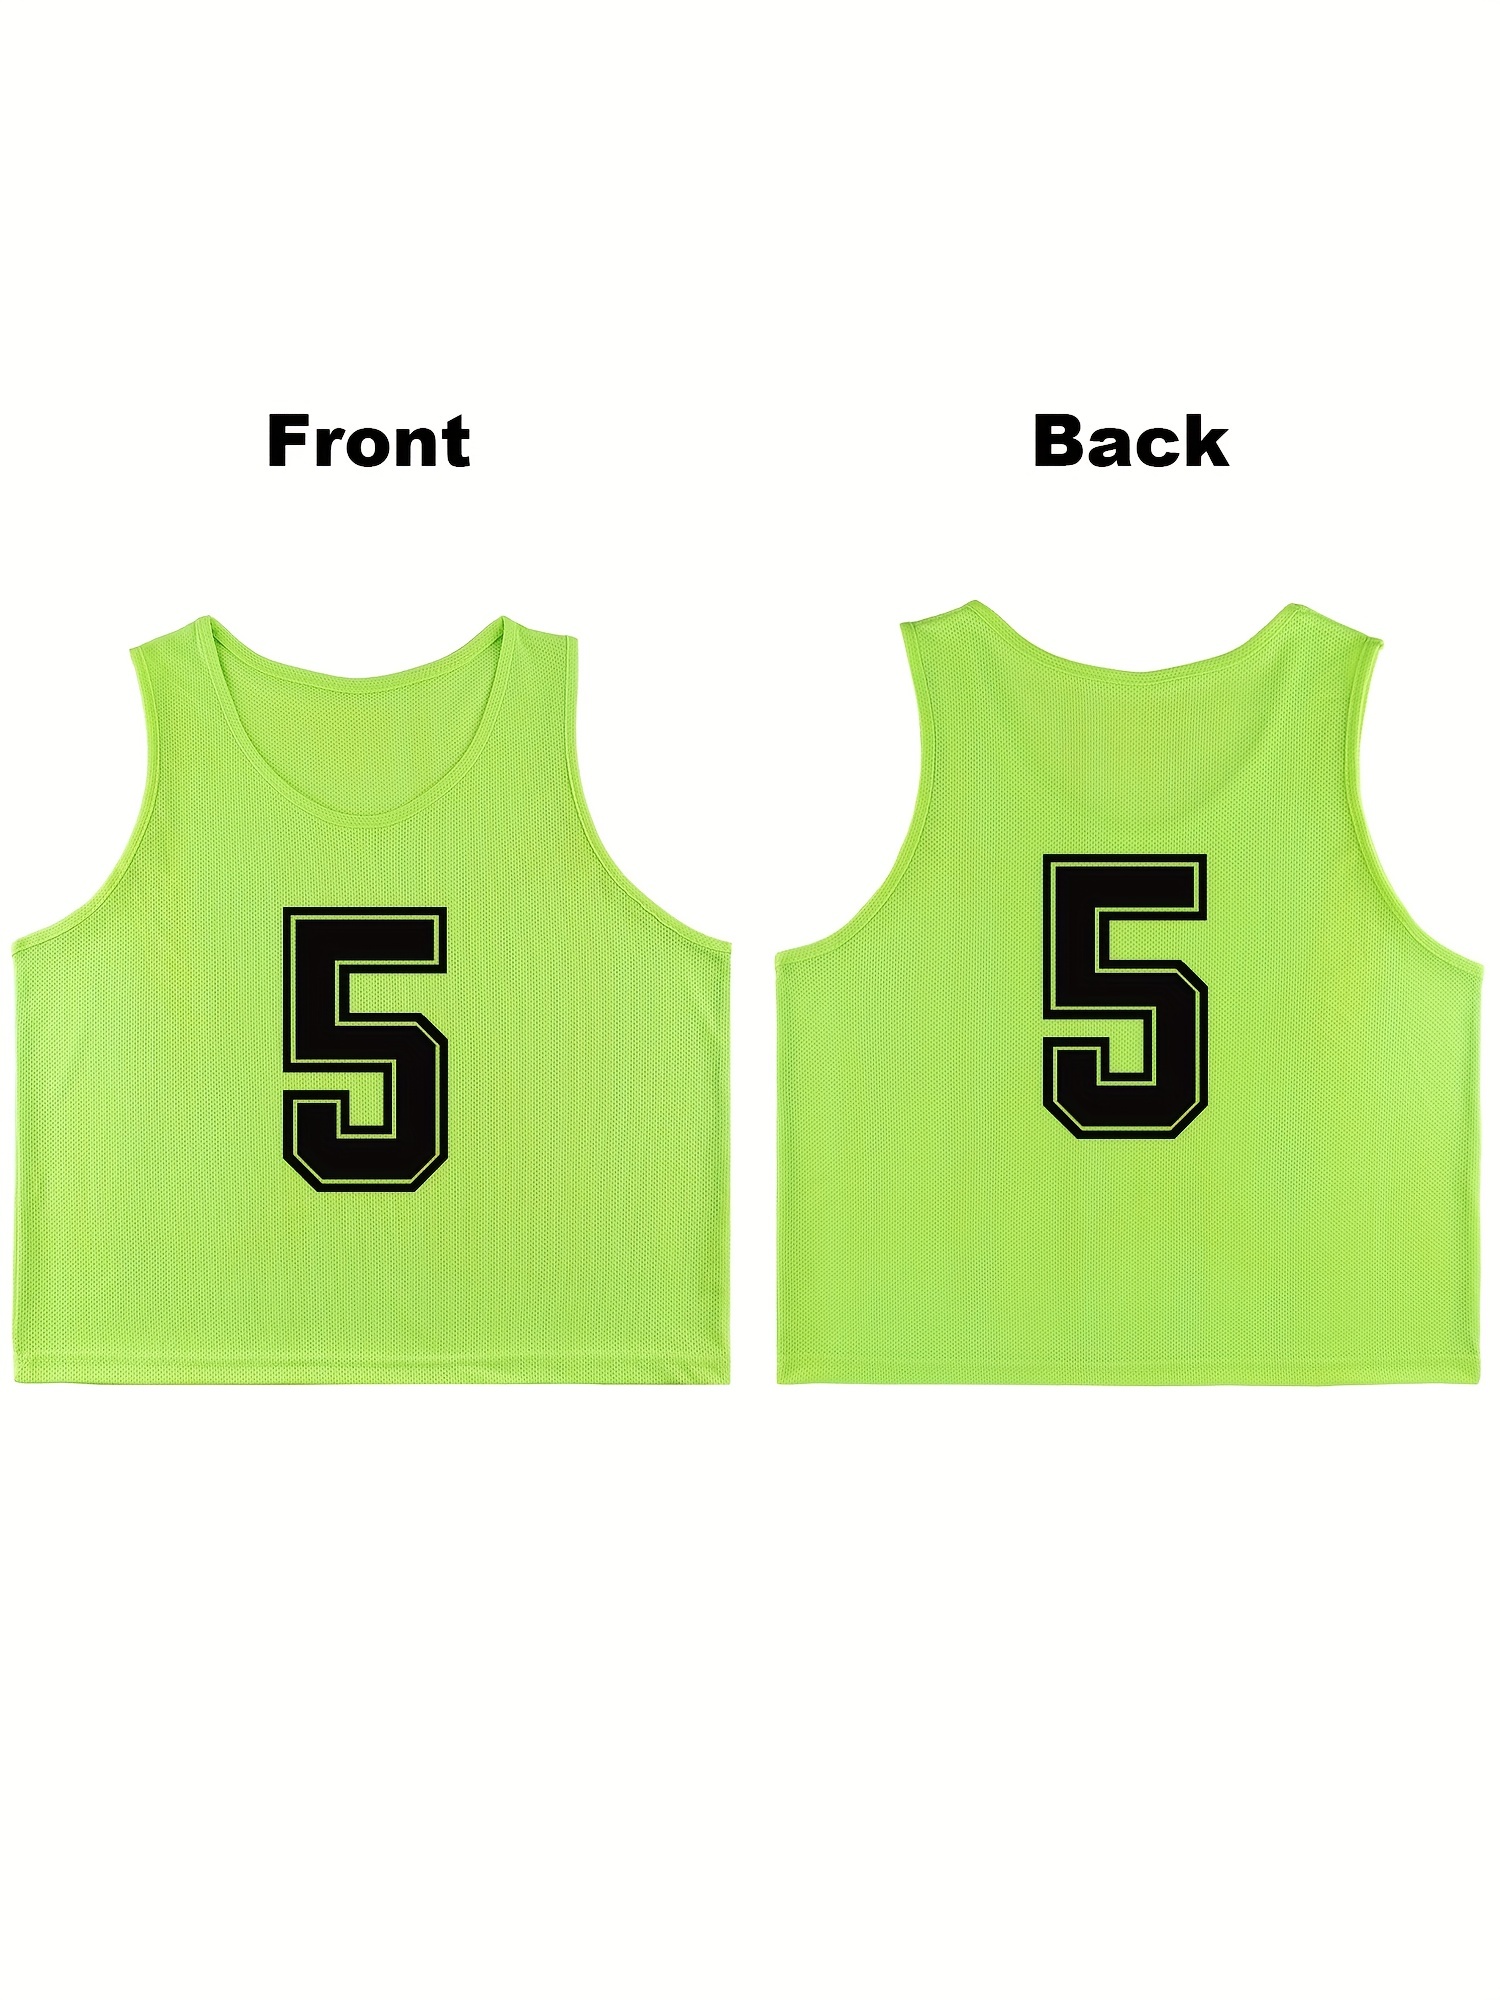 Toptie TopTie Training Vests, Football Jersey, Pinnies for Soccer Team,  Multiple Colors and Quantities